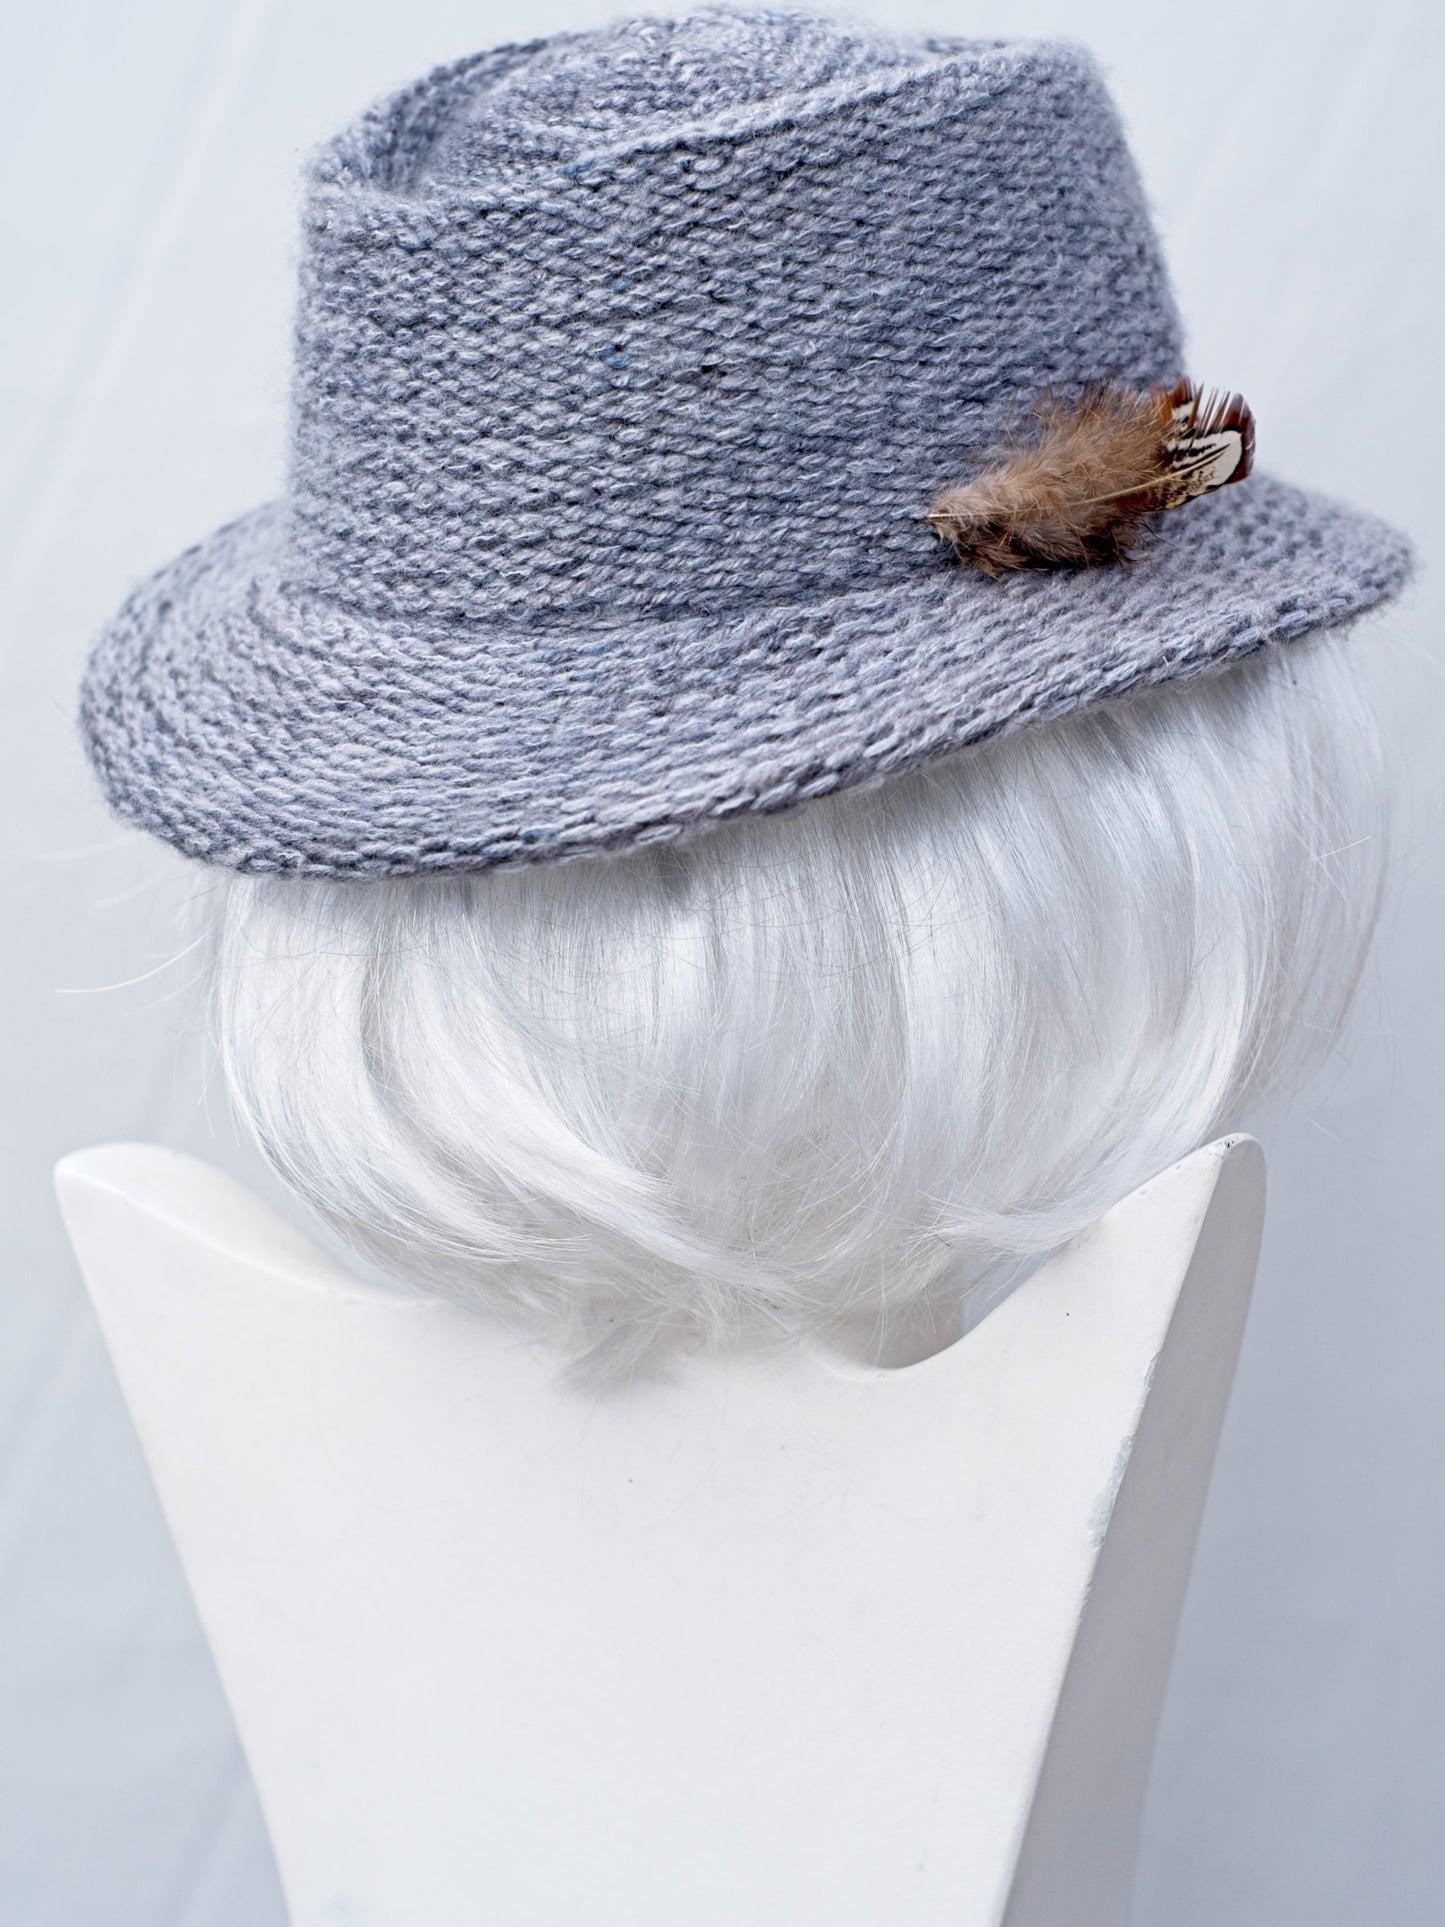 Vintage Fuzzy Wool Knit Trilby Hat with Brim • Winter Hat • Wooly Hat